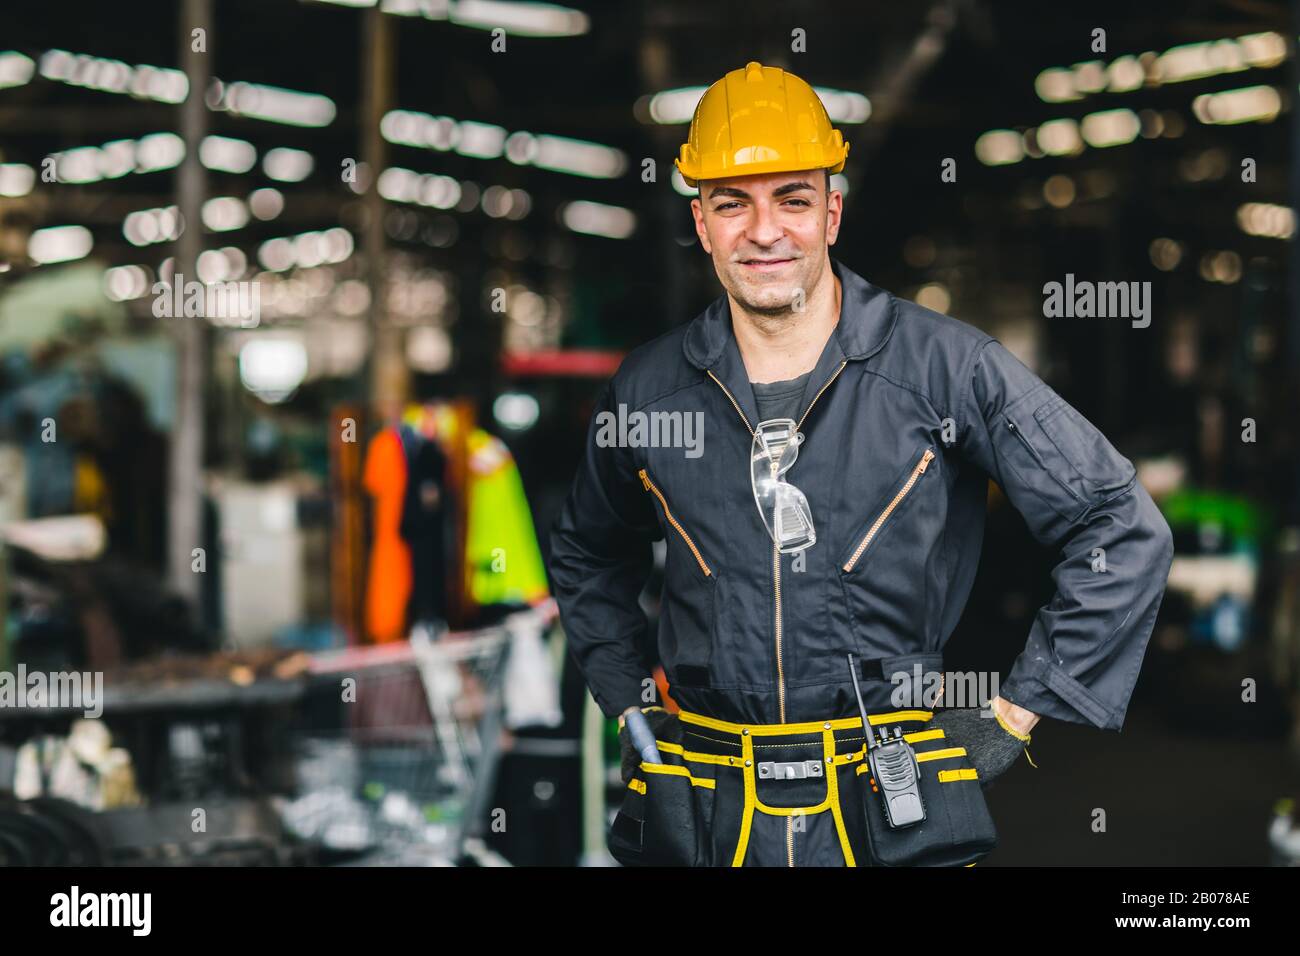 Happy worker, portrait smile handsome labor with safety suit tools belt and radio service man in factory. Stock Photo